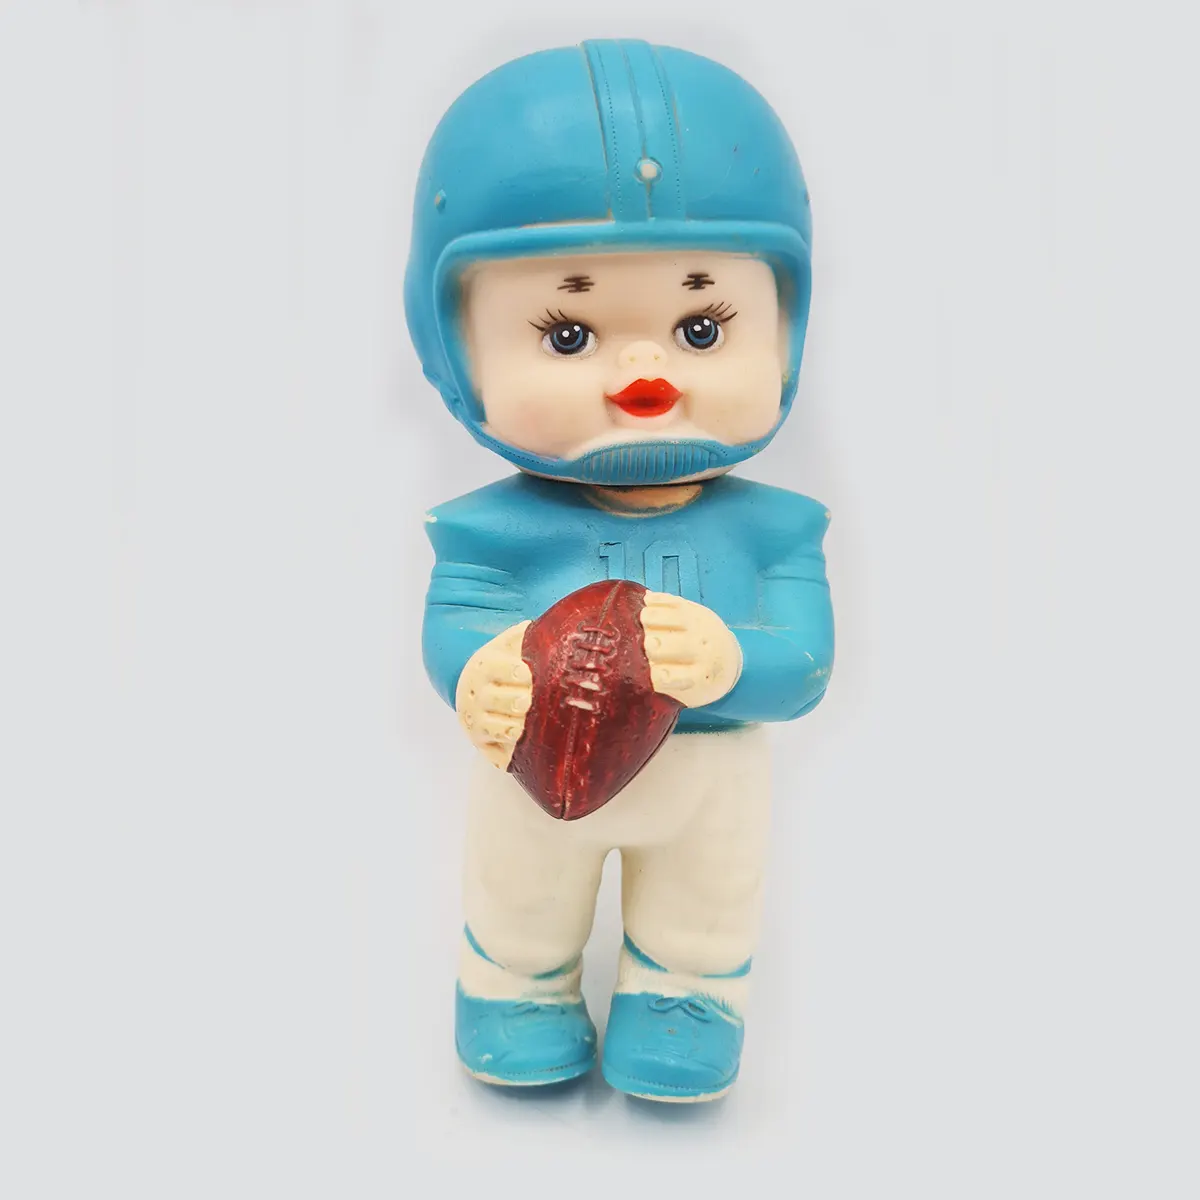 Vintage Football Player Squeaker Toy